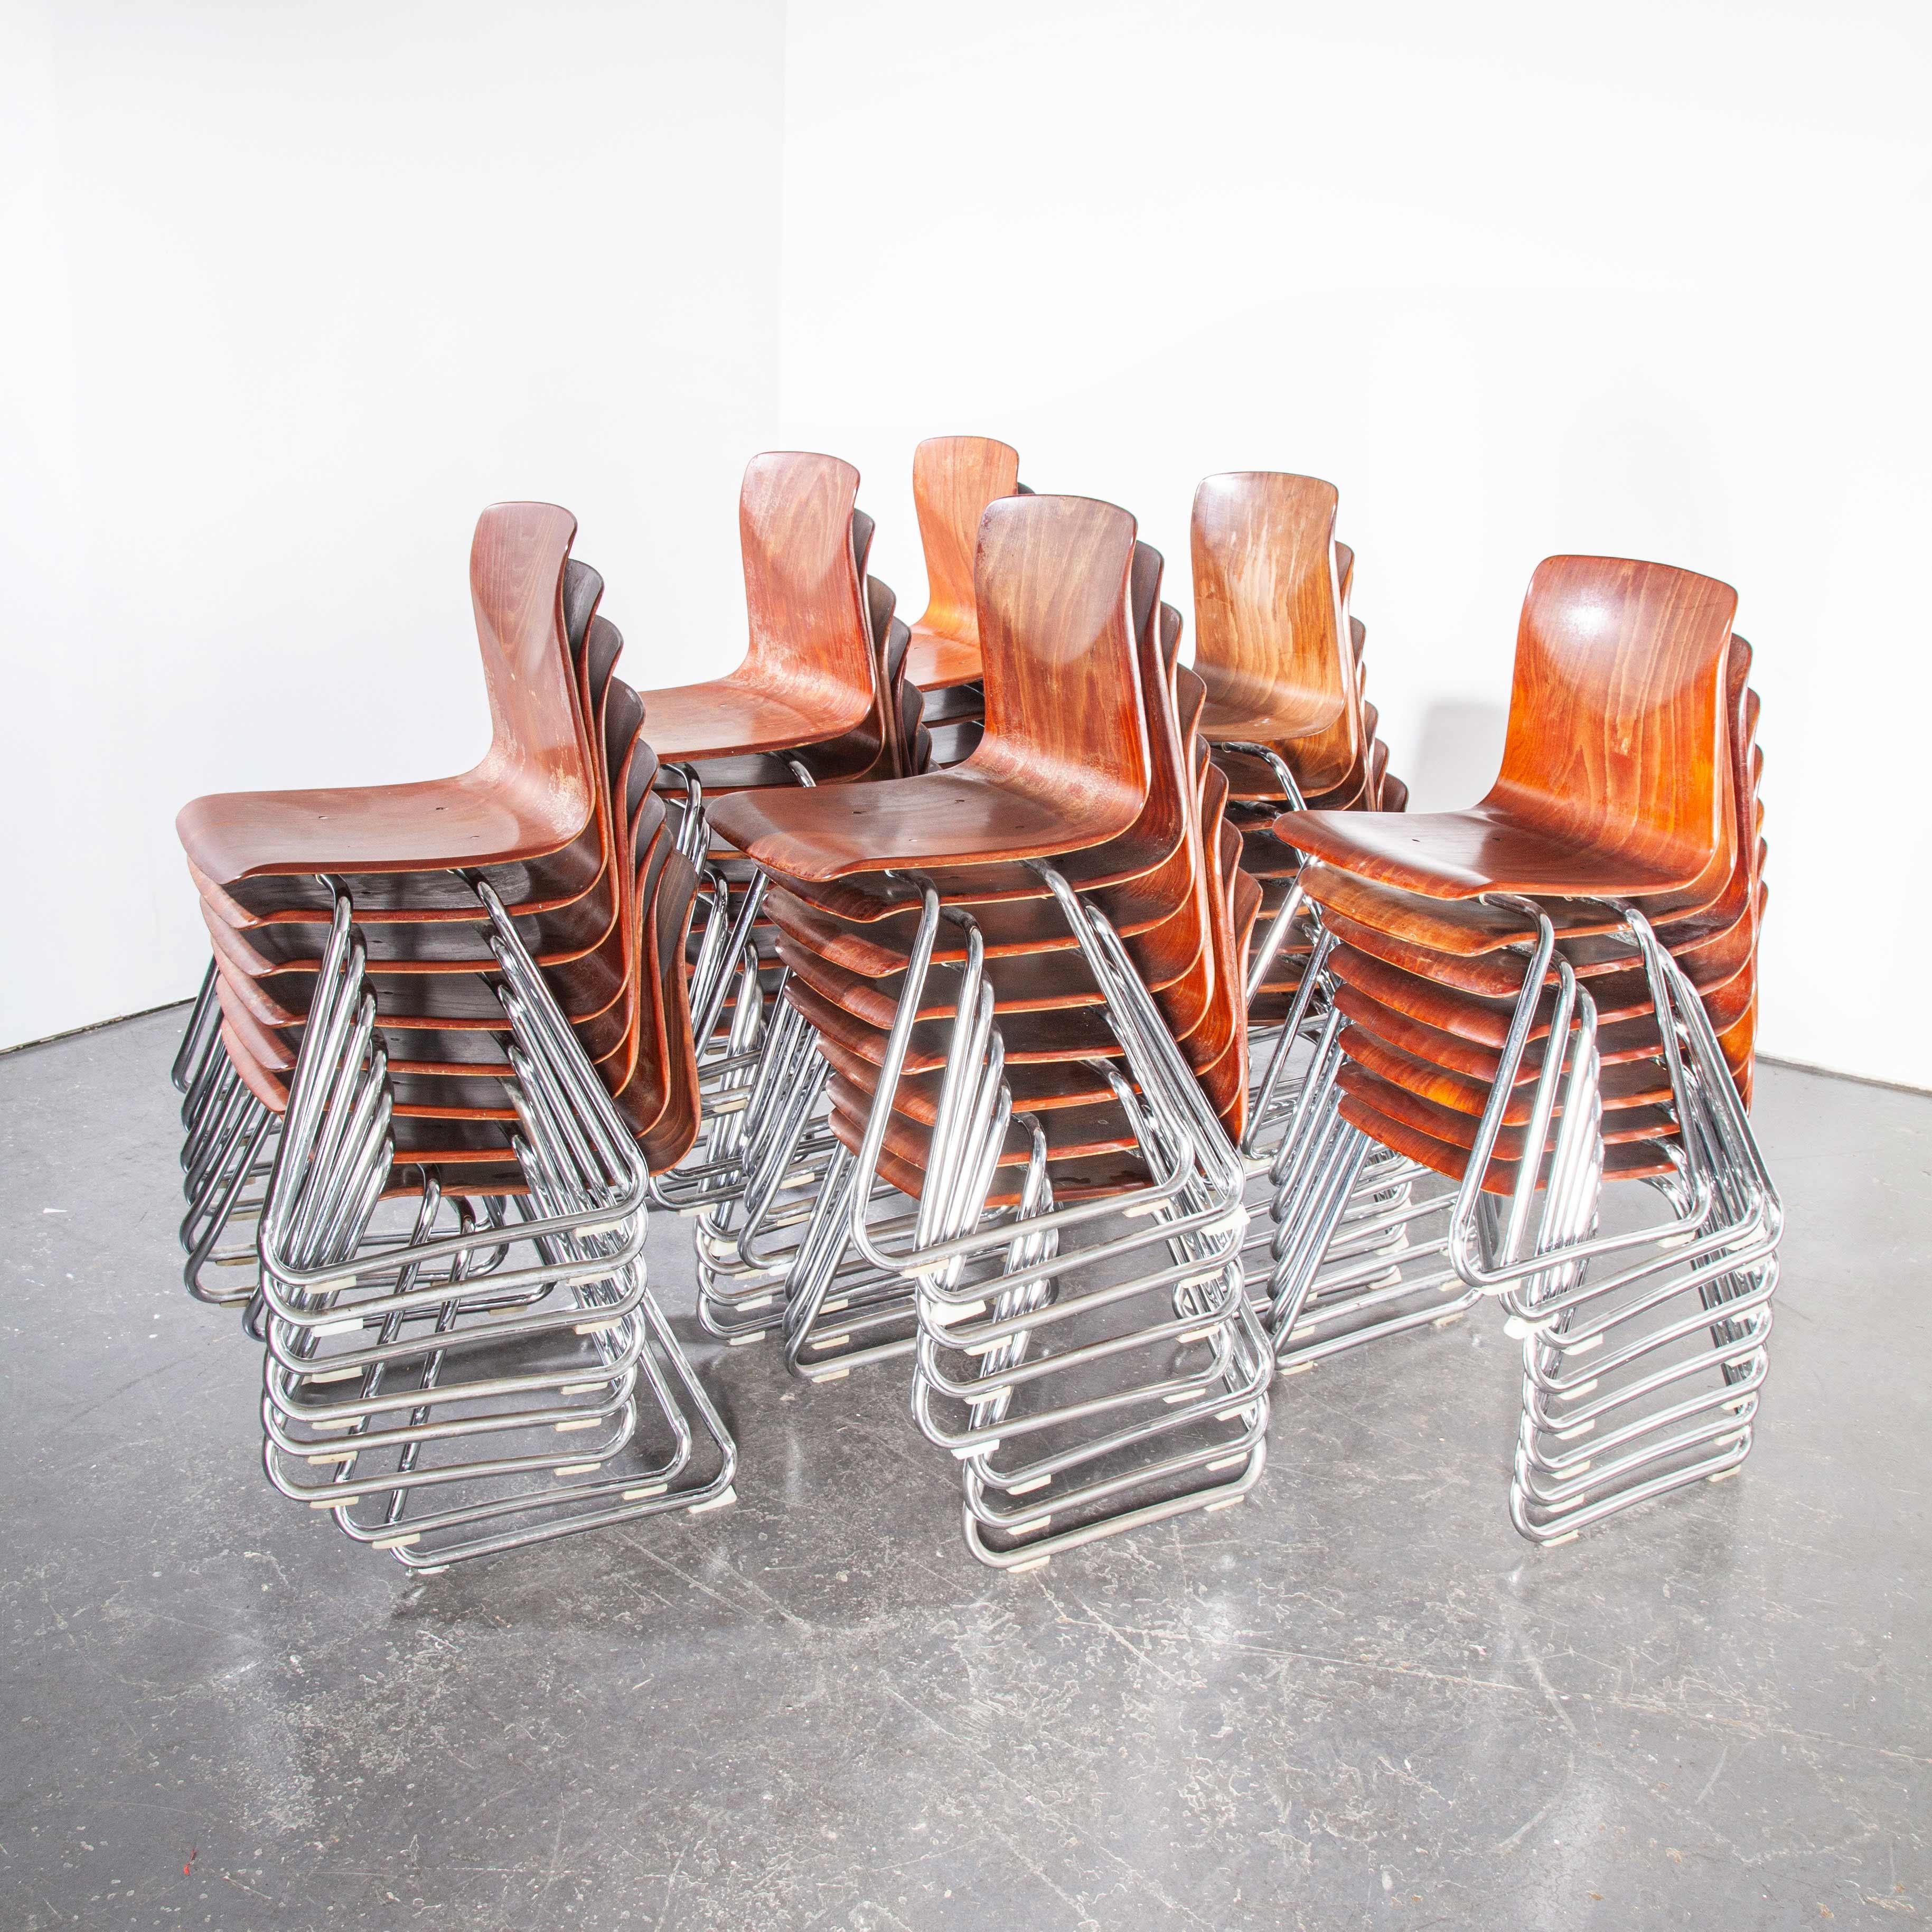 1960's Pagholz Dining Chairs Laminated Hardwood And Chrome Legs - Various Qty 8